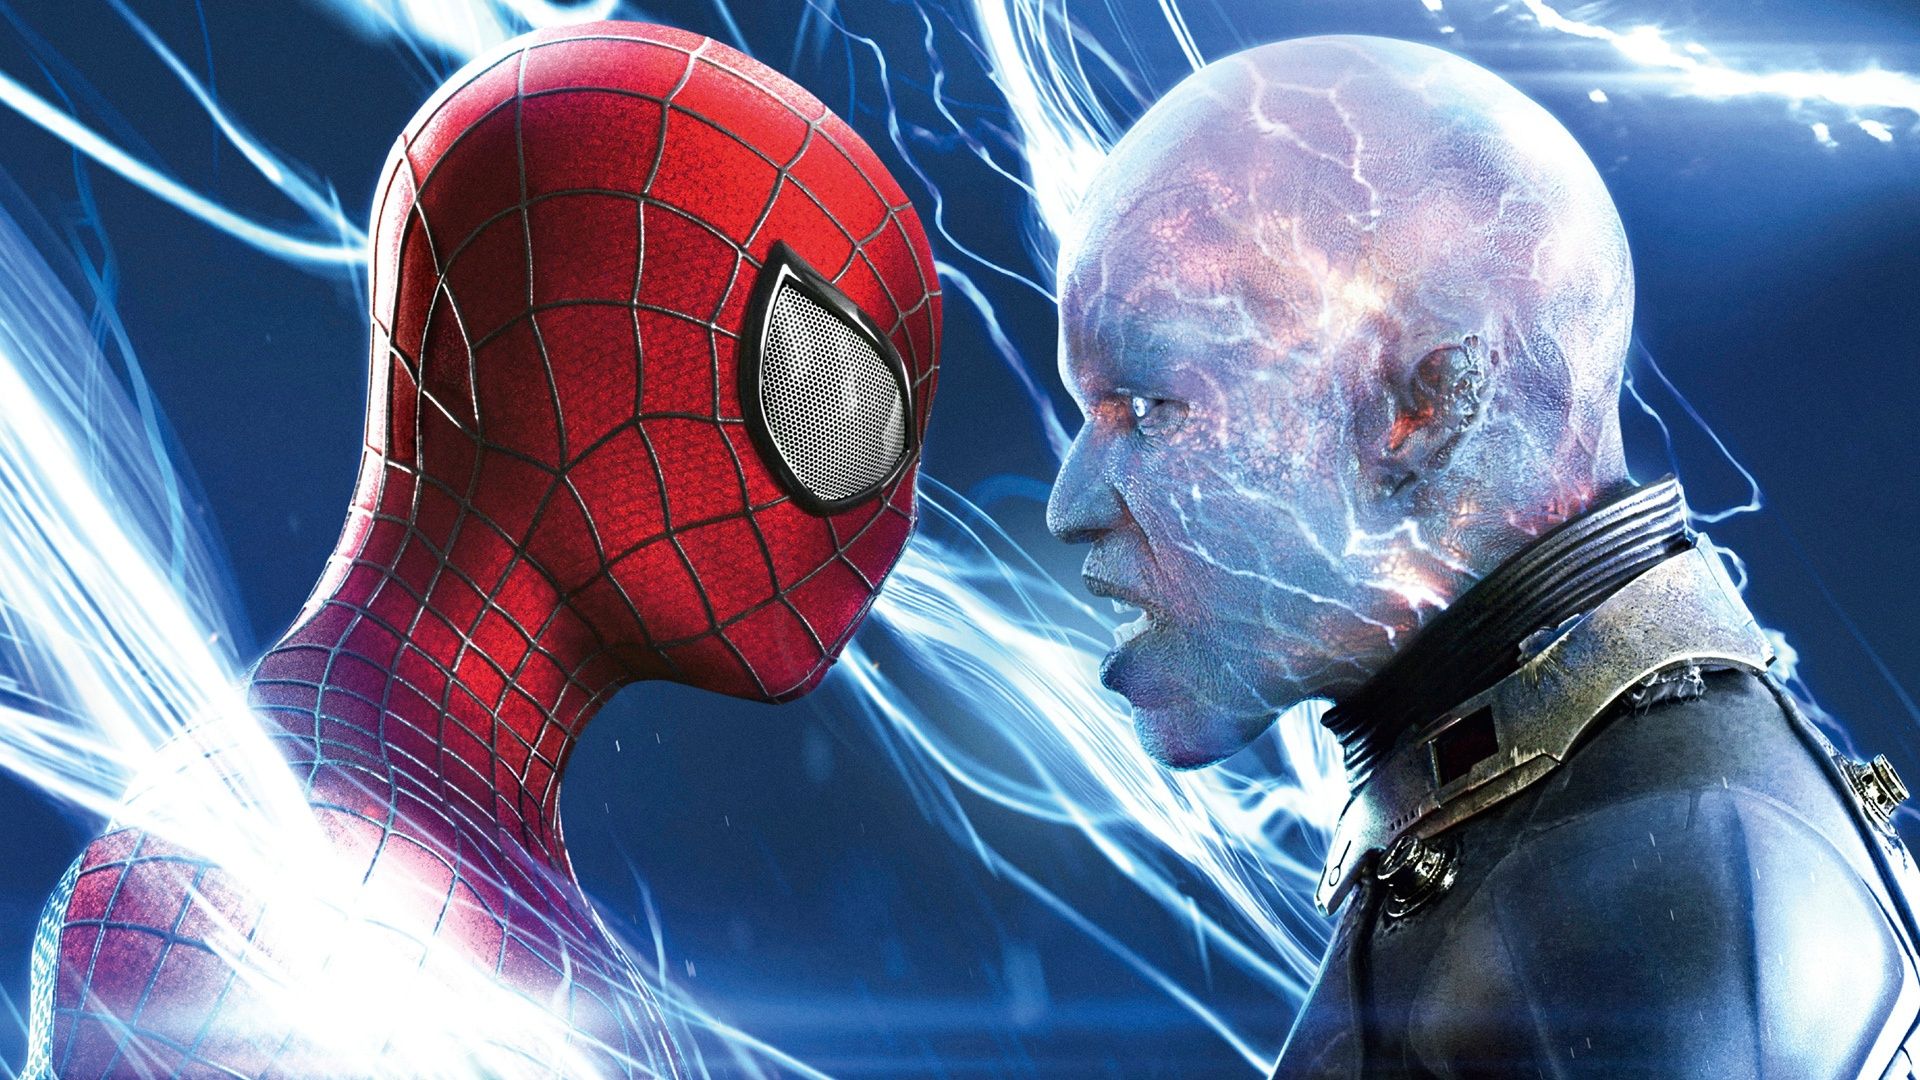 Spiderman Electro Max Dillon Wallpapers | HD Wallpapers